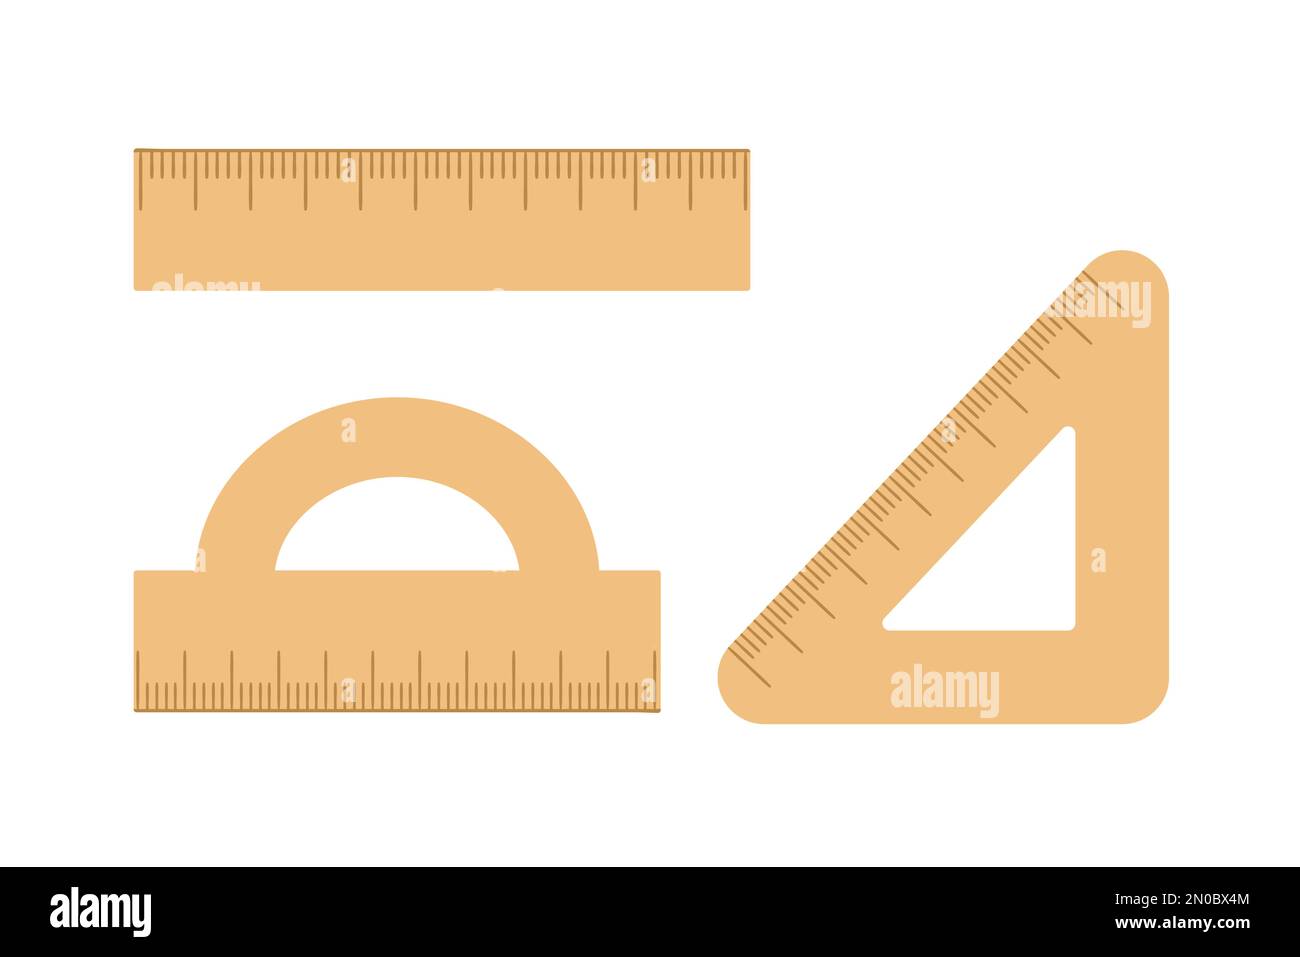 Vector set of rulers. Back to school educational clipart. Cute flat style measuring tools illustration. Stock Vector